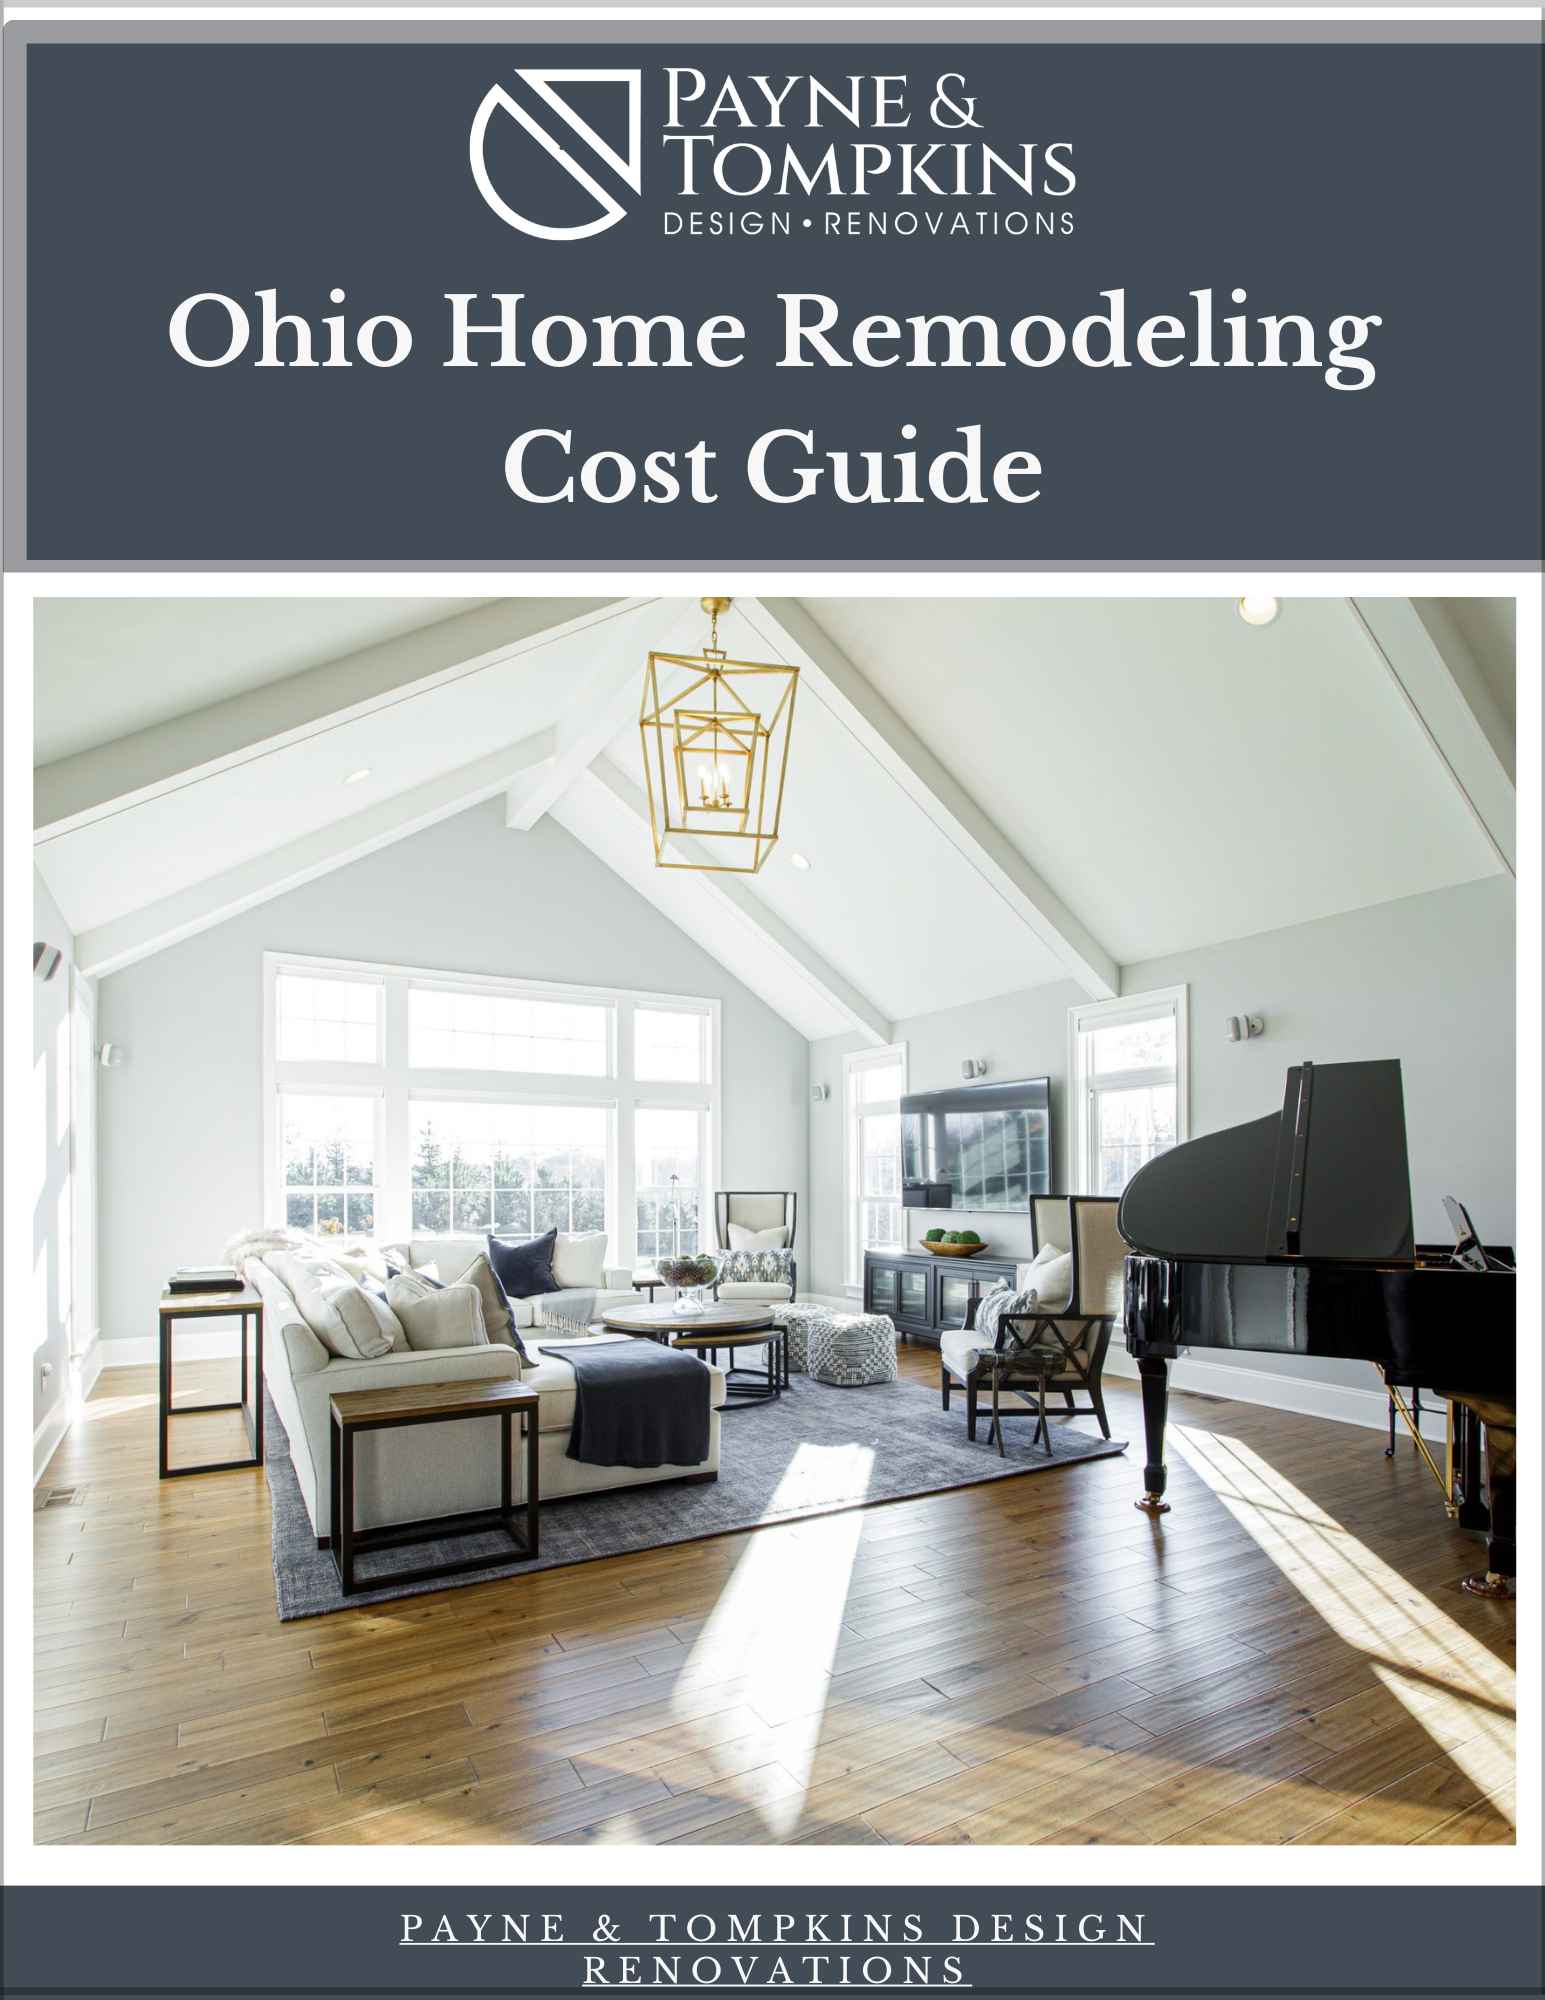 Ohio Remodeling Cost Guide Payne & Tompkins